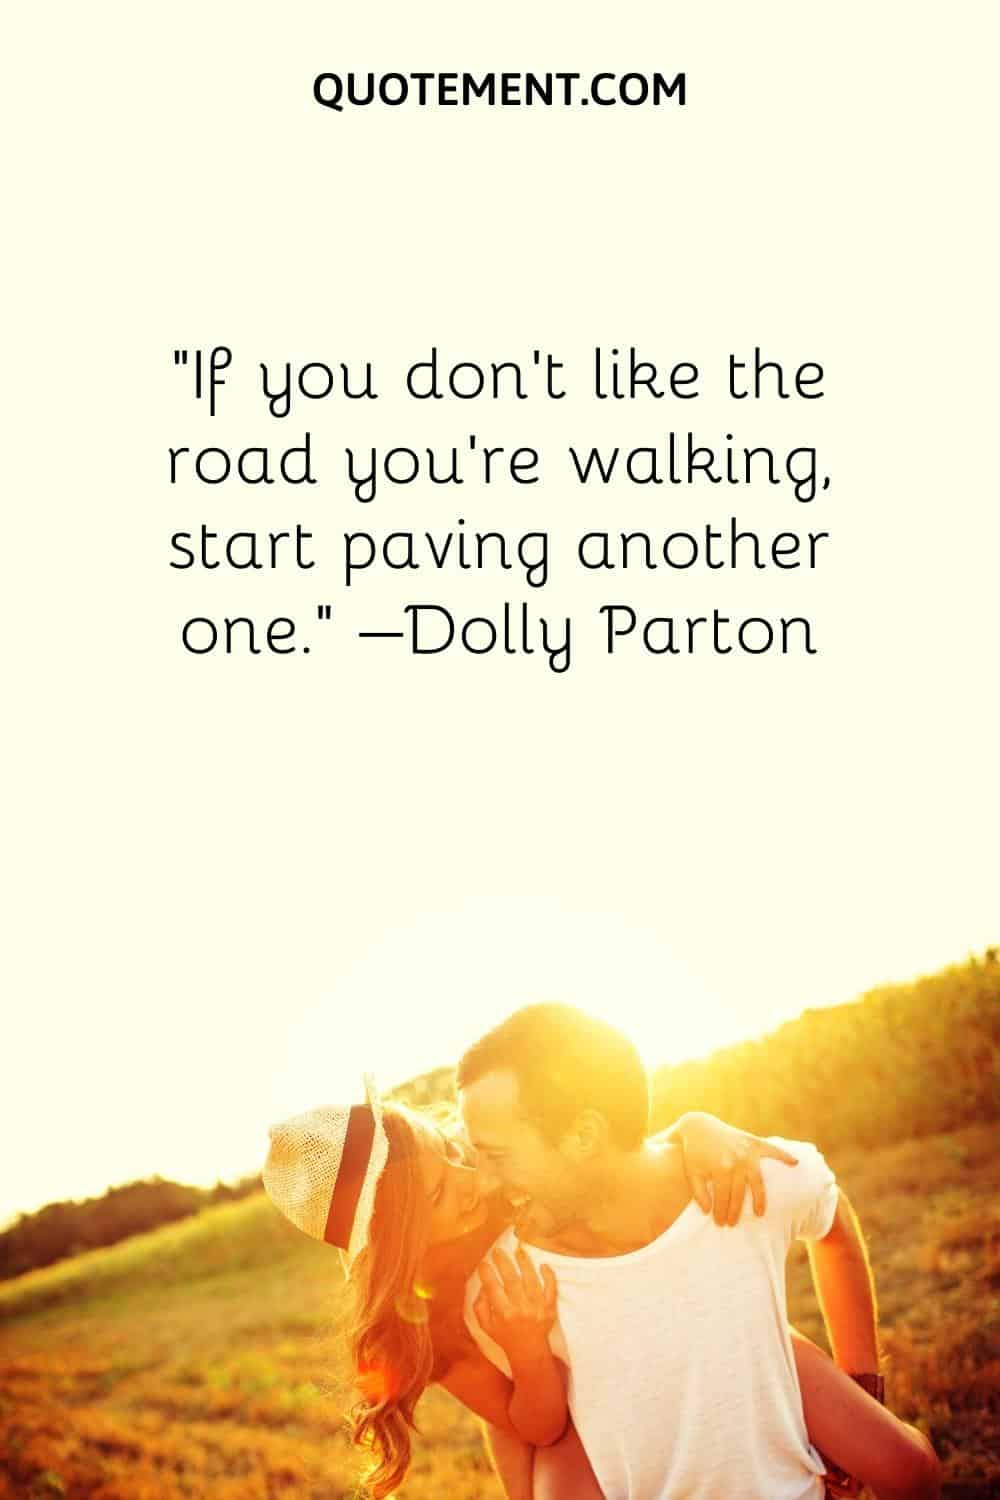 If you don't like the road you're walking, start paving another one